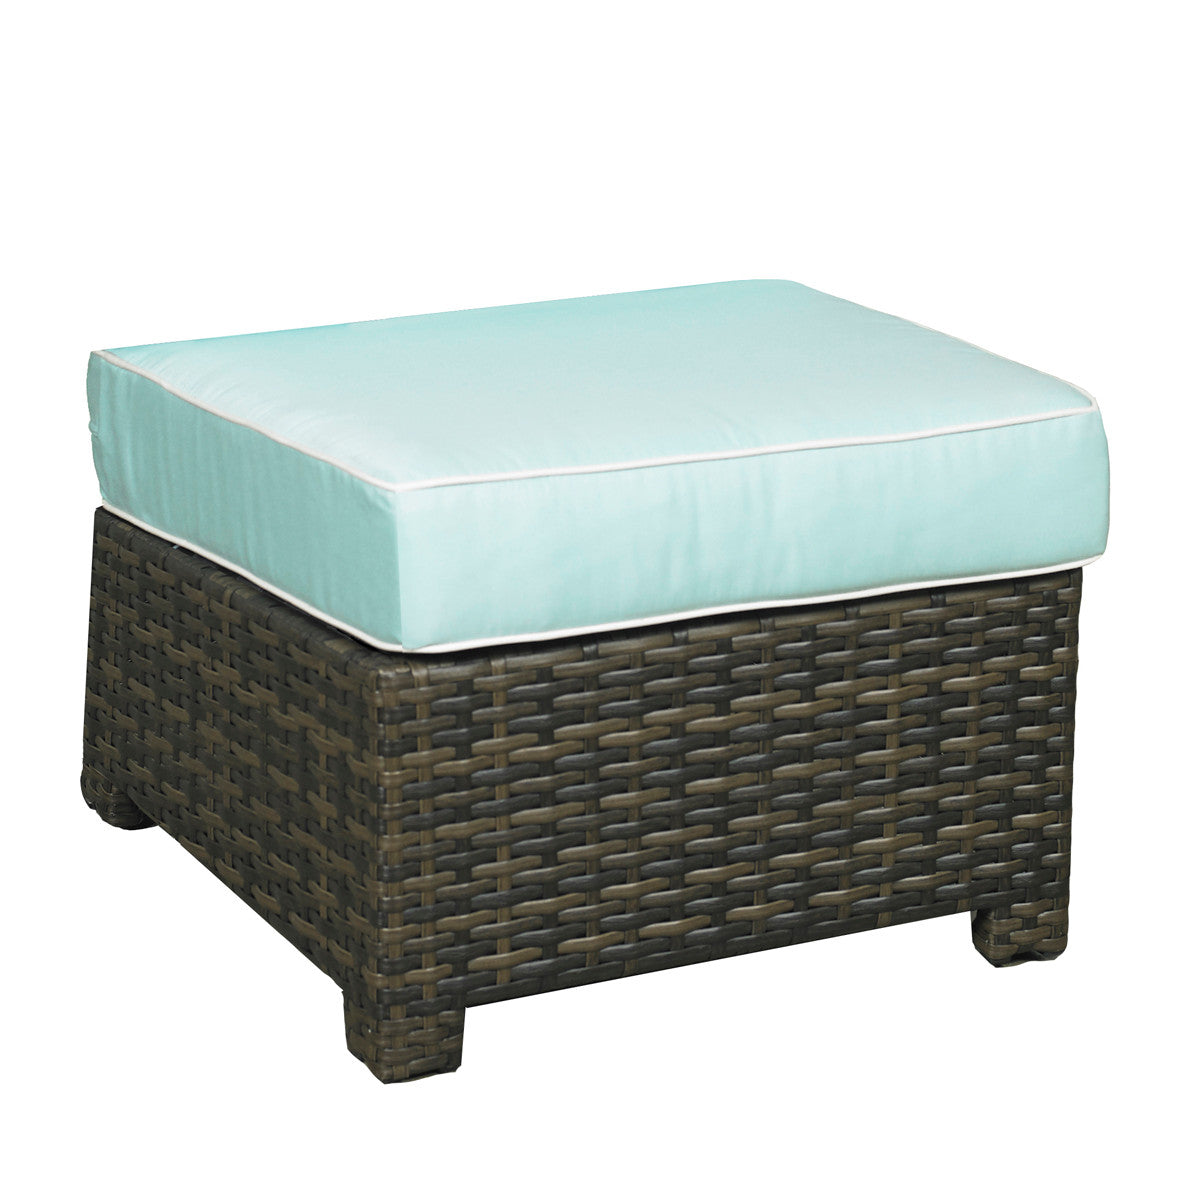 Forever Patio Brookside Wicker Square Ottoman